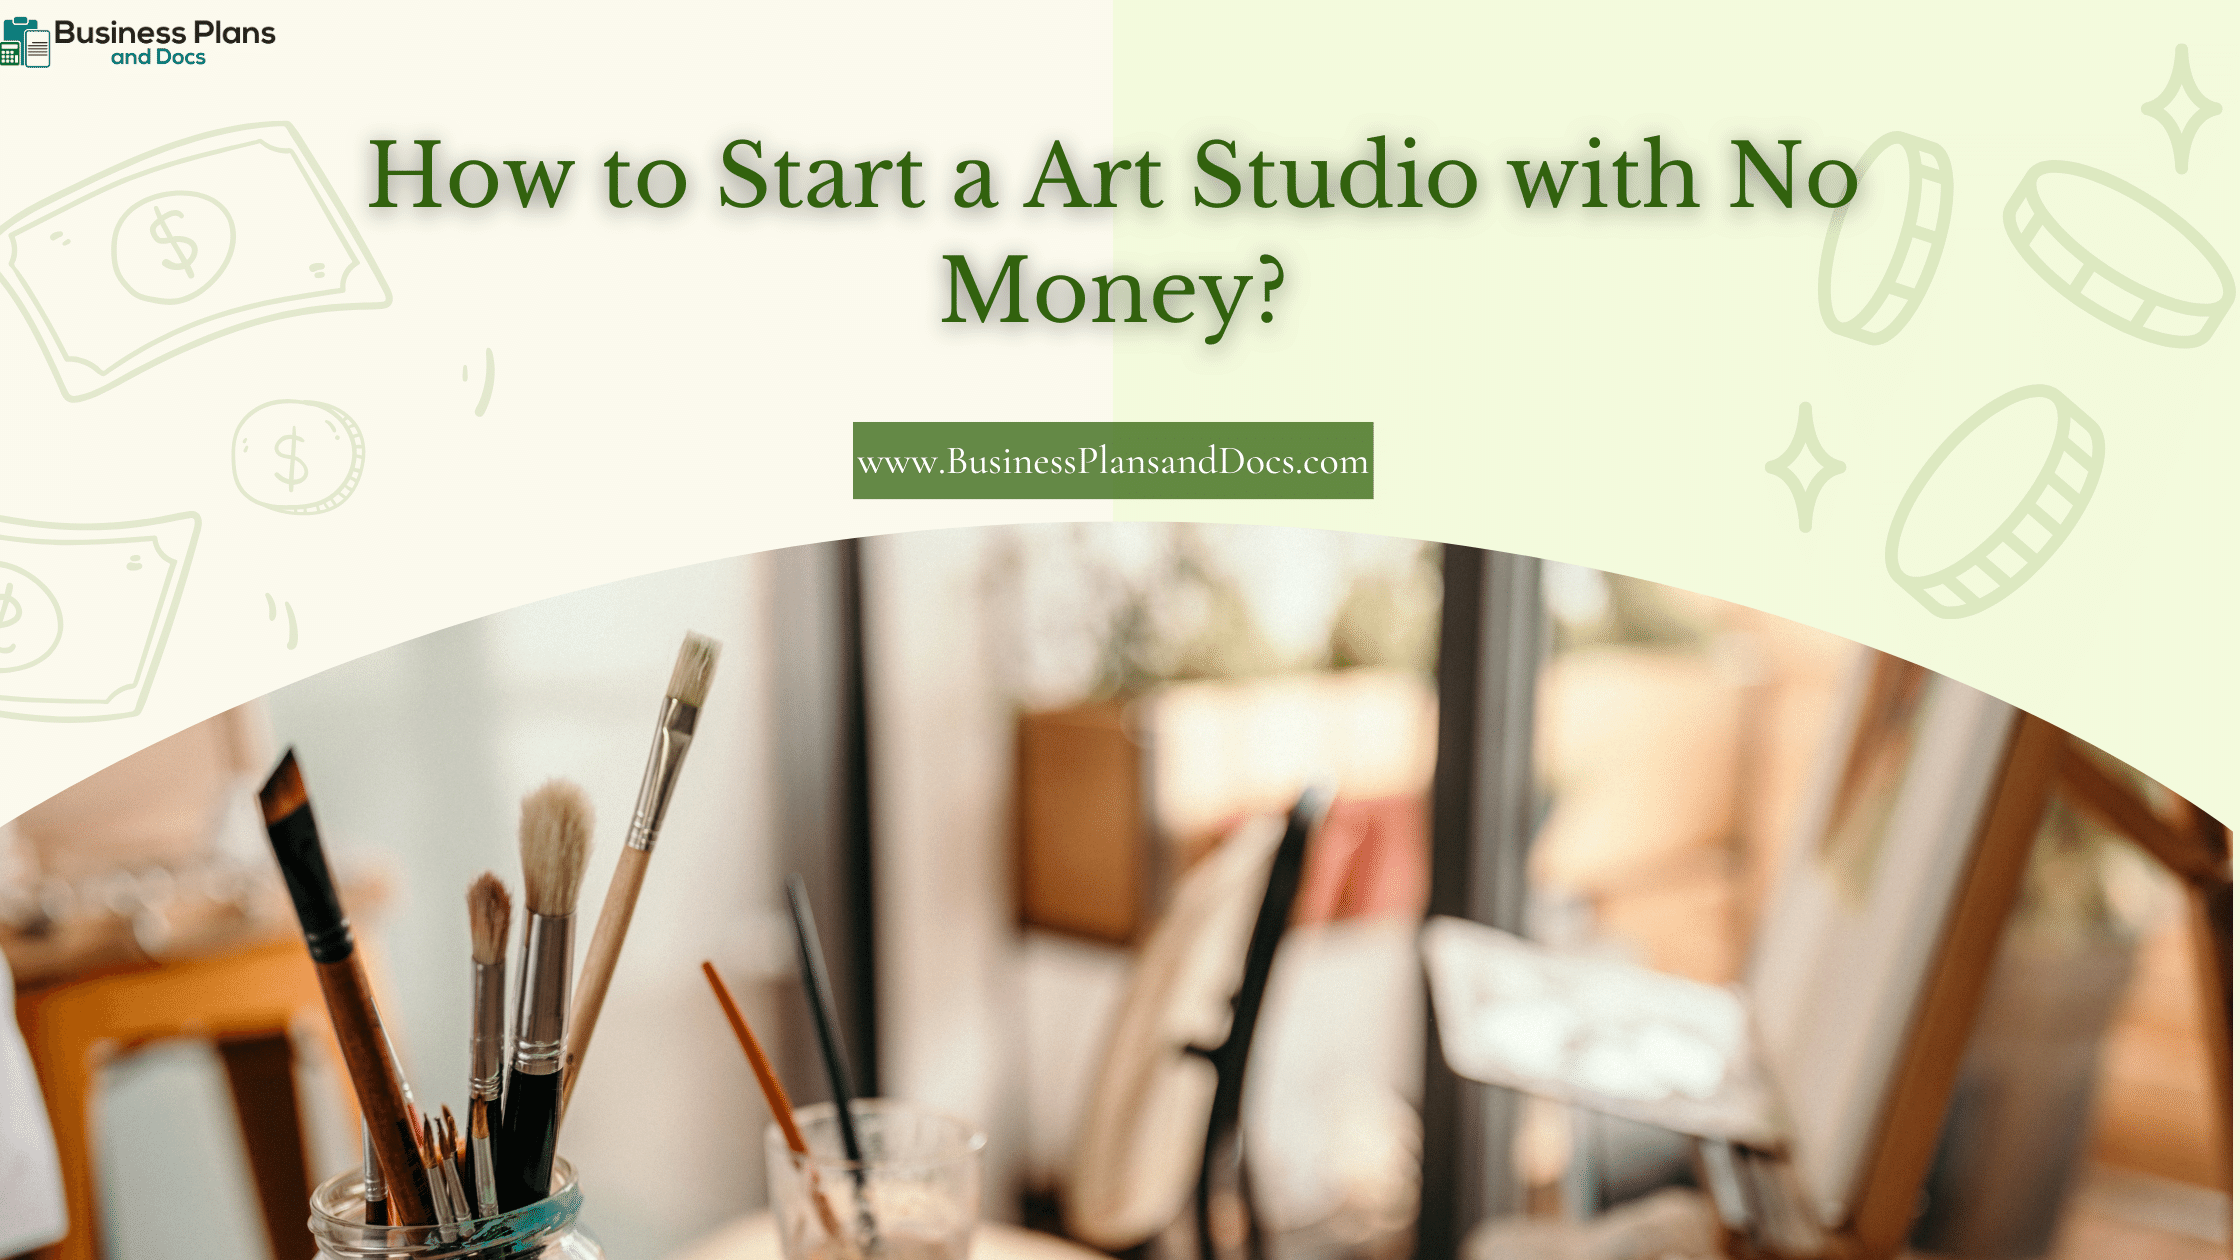 How to Start an Art Studio with No Money?